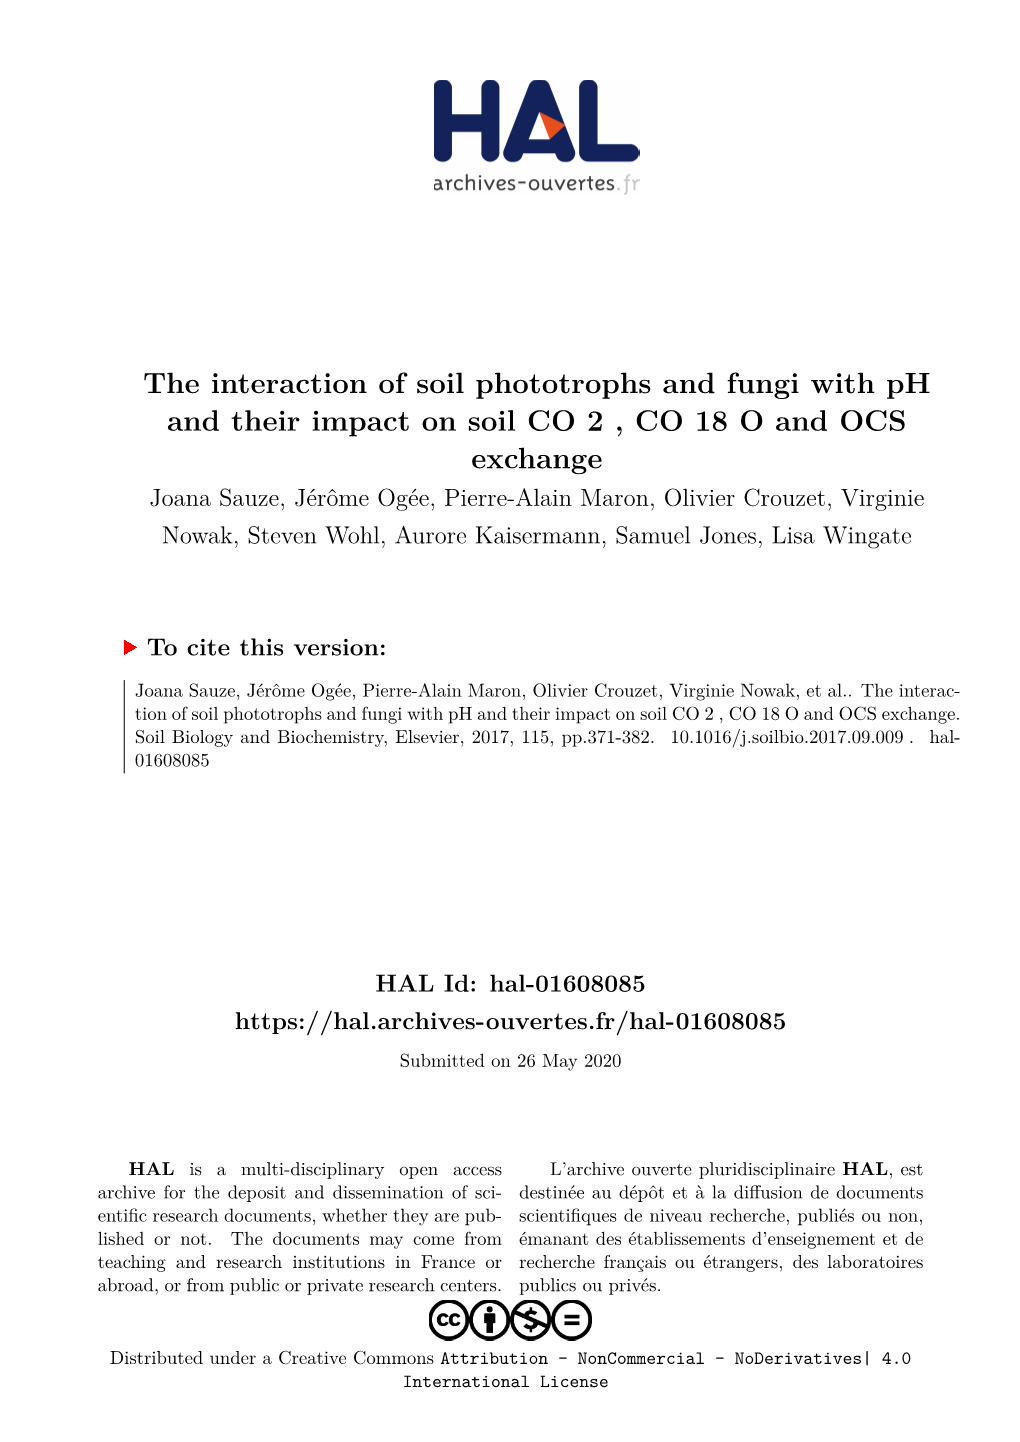 The Interaction of Soil Phototrophs and Fungi with Ph and Their Impact On